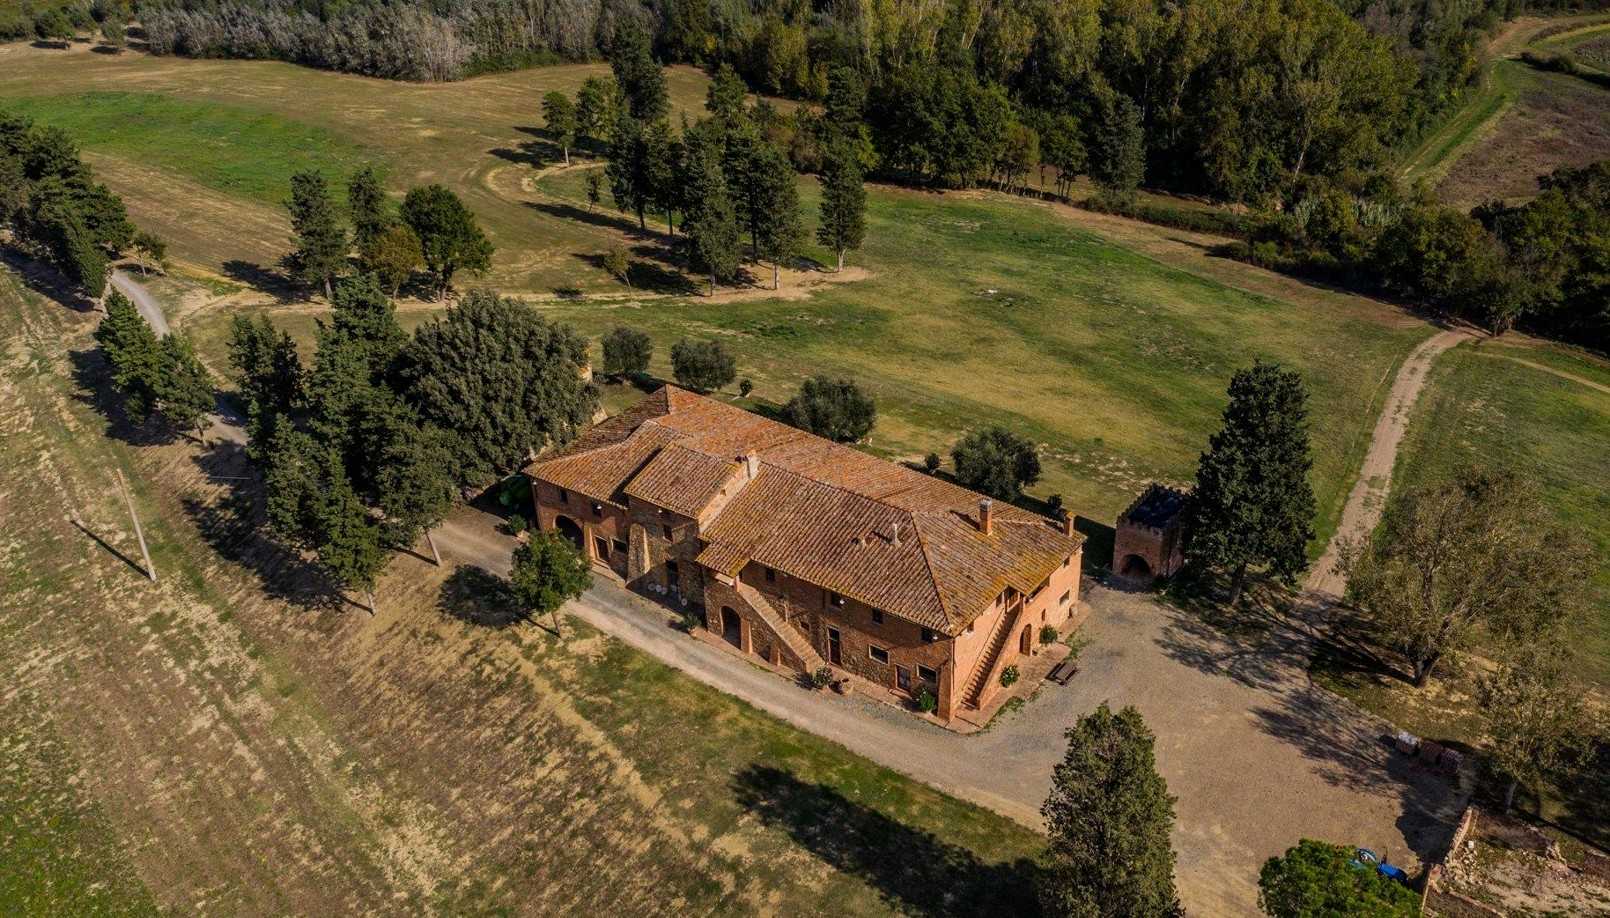 Bilder Former monastery in great location with 100 hectares of land